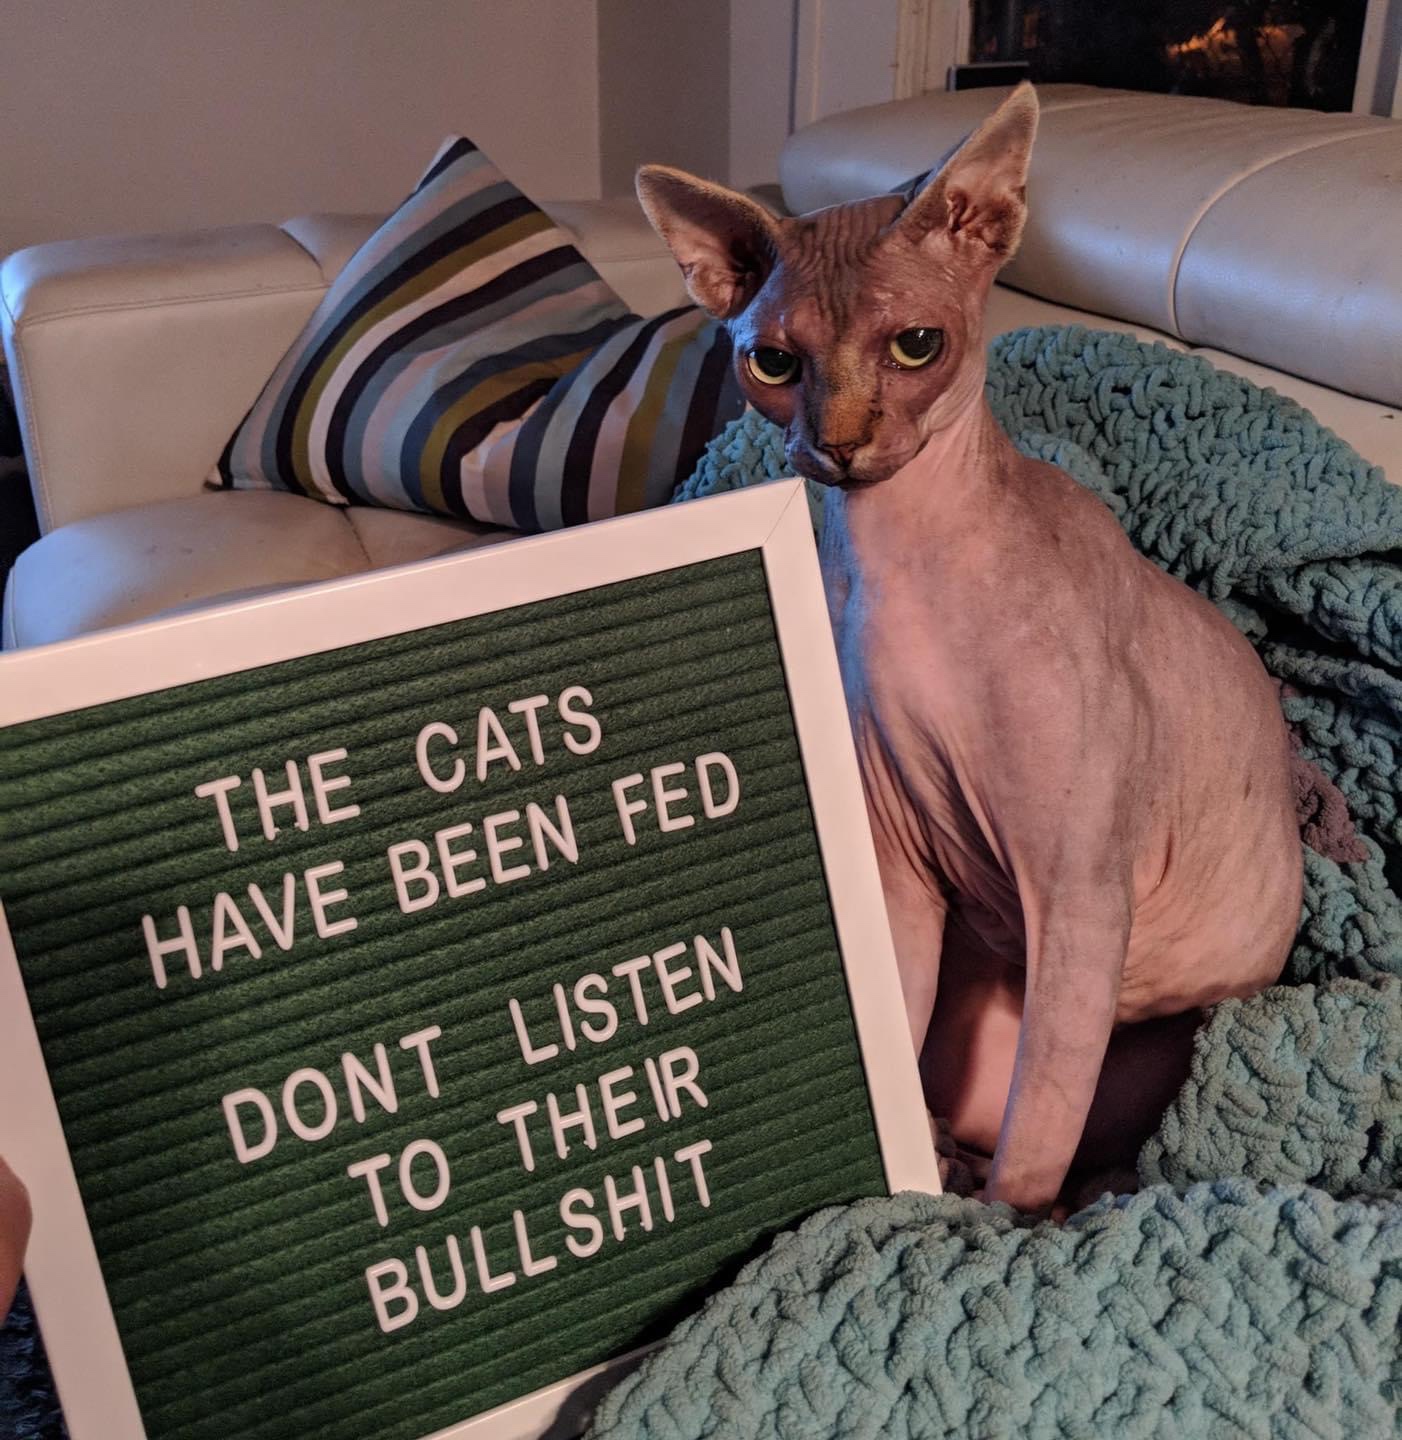 sphynx - The Cats Have Been Fed Dont Listen To Their Bull Shit